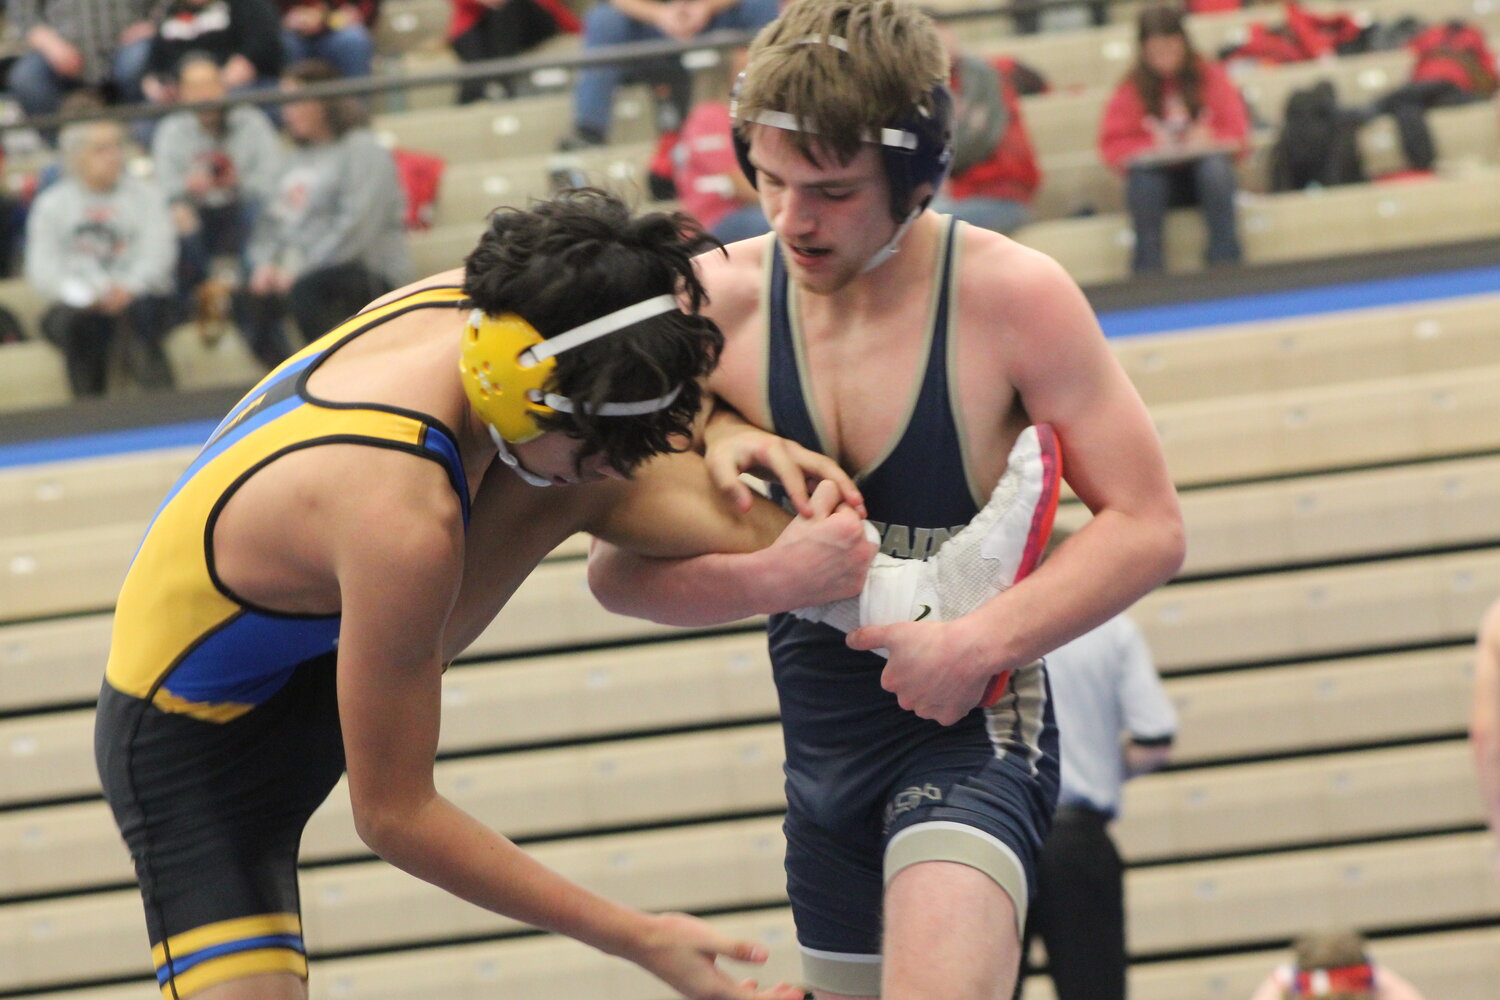 Fountain Central's Dallas Simmons was the runner up at 120 with Cville's Armando Munoz taking 4th.